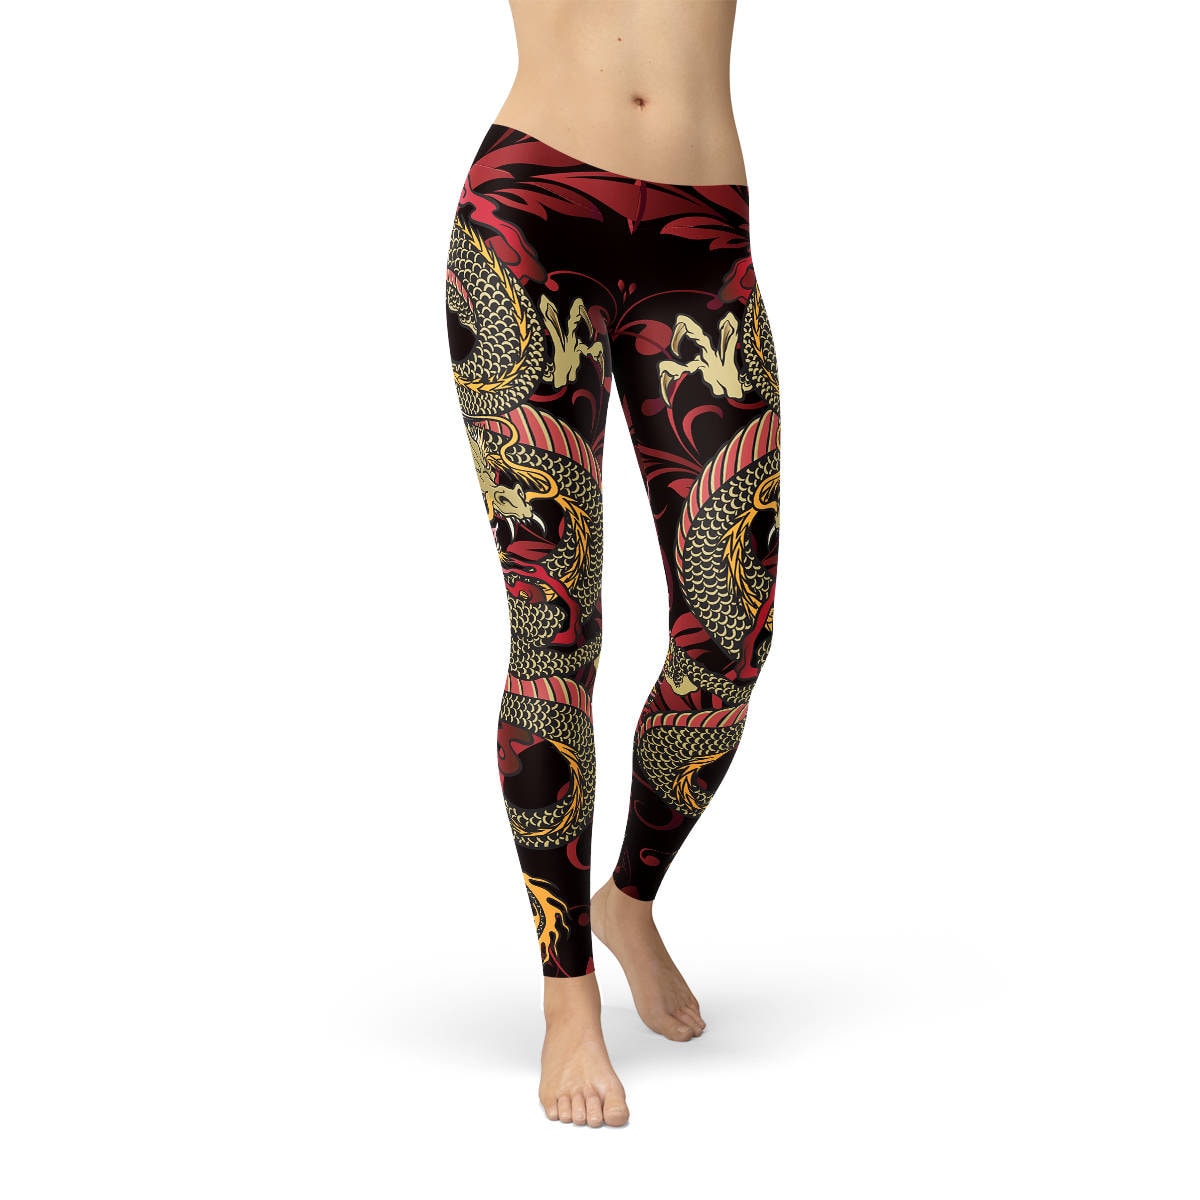 Find IMPORTED CHINA LEGGINGS by COSTUME CODE near me